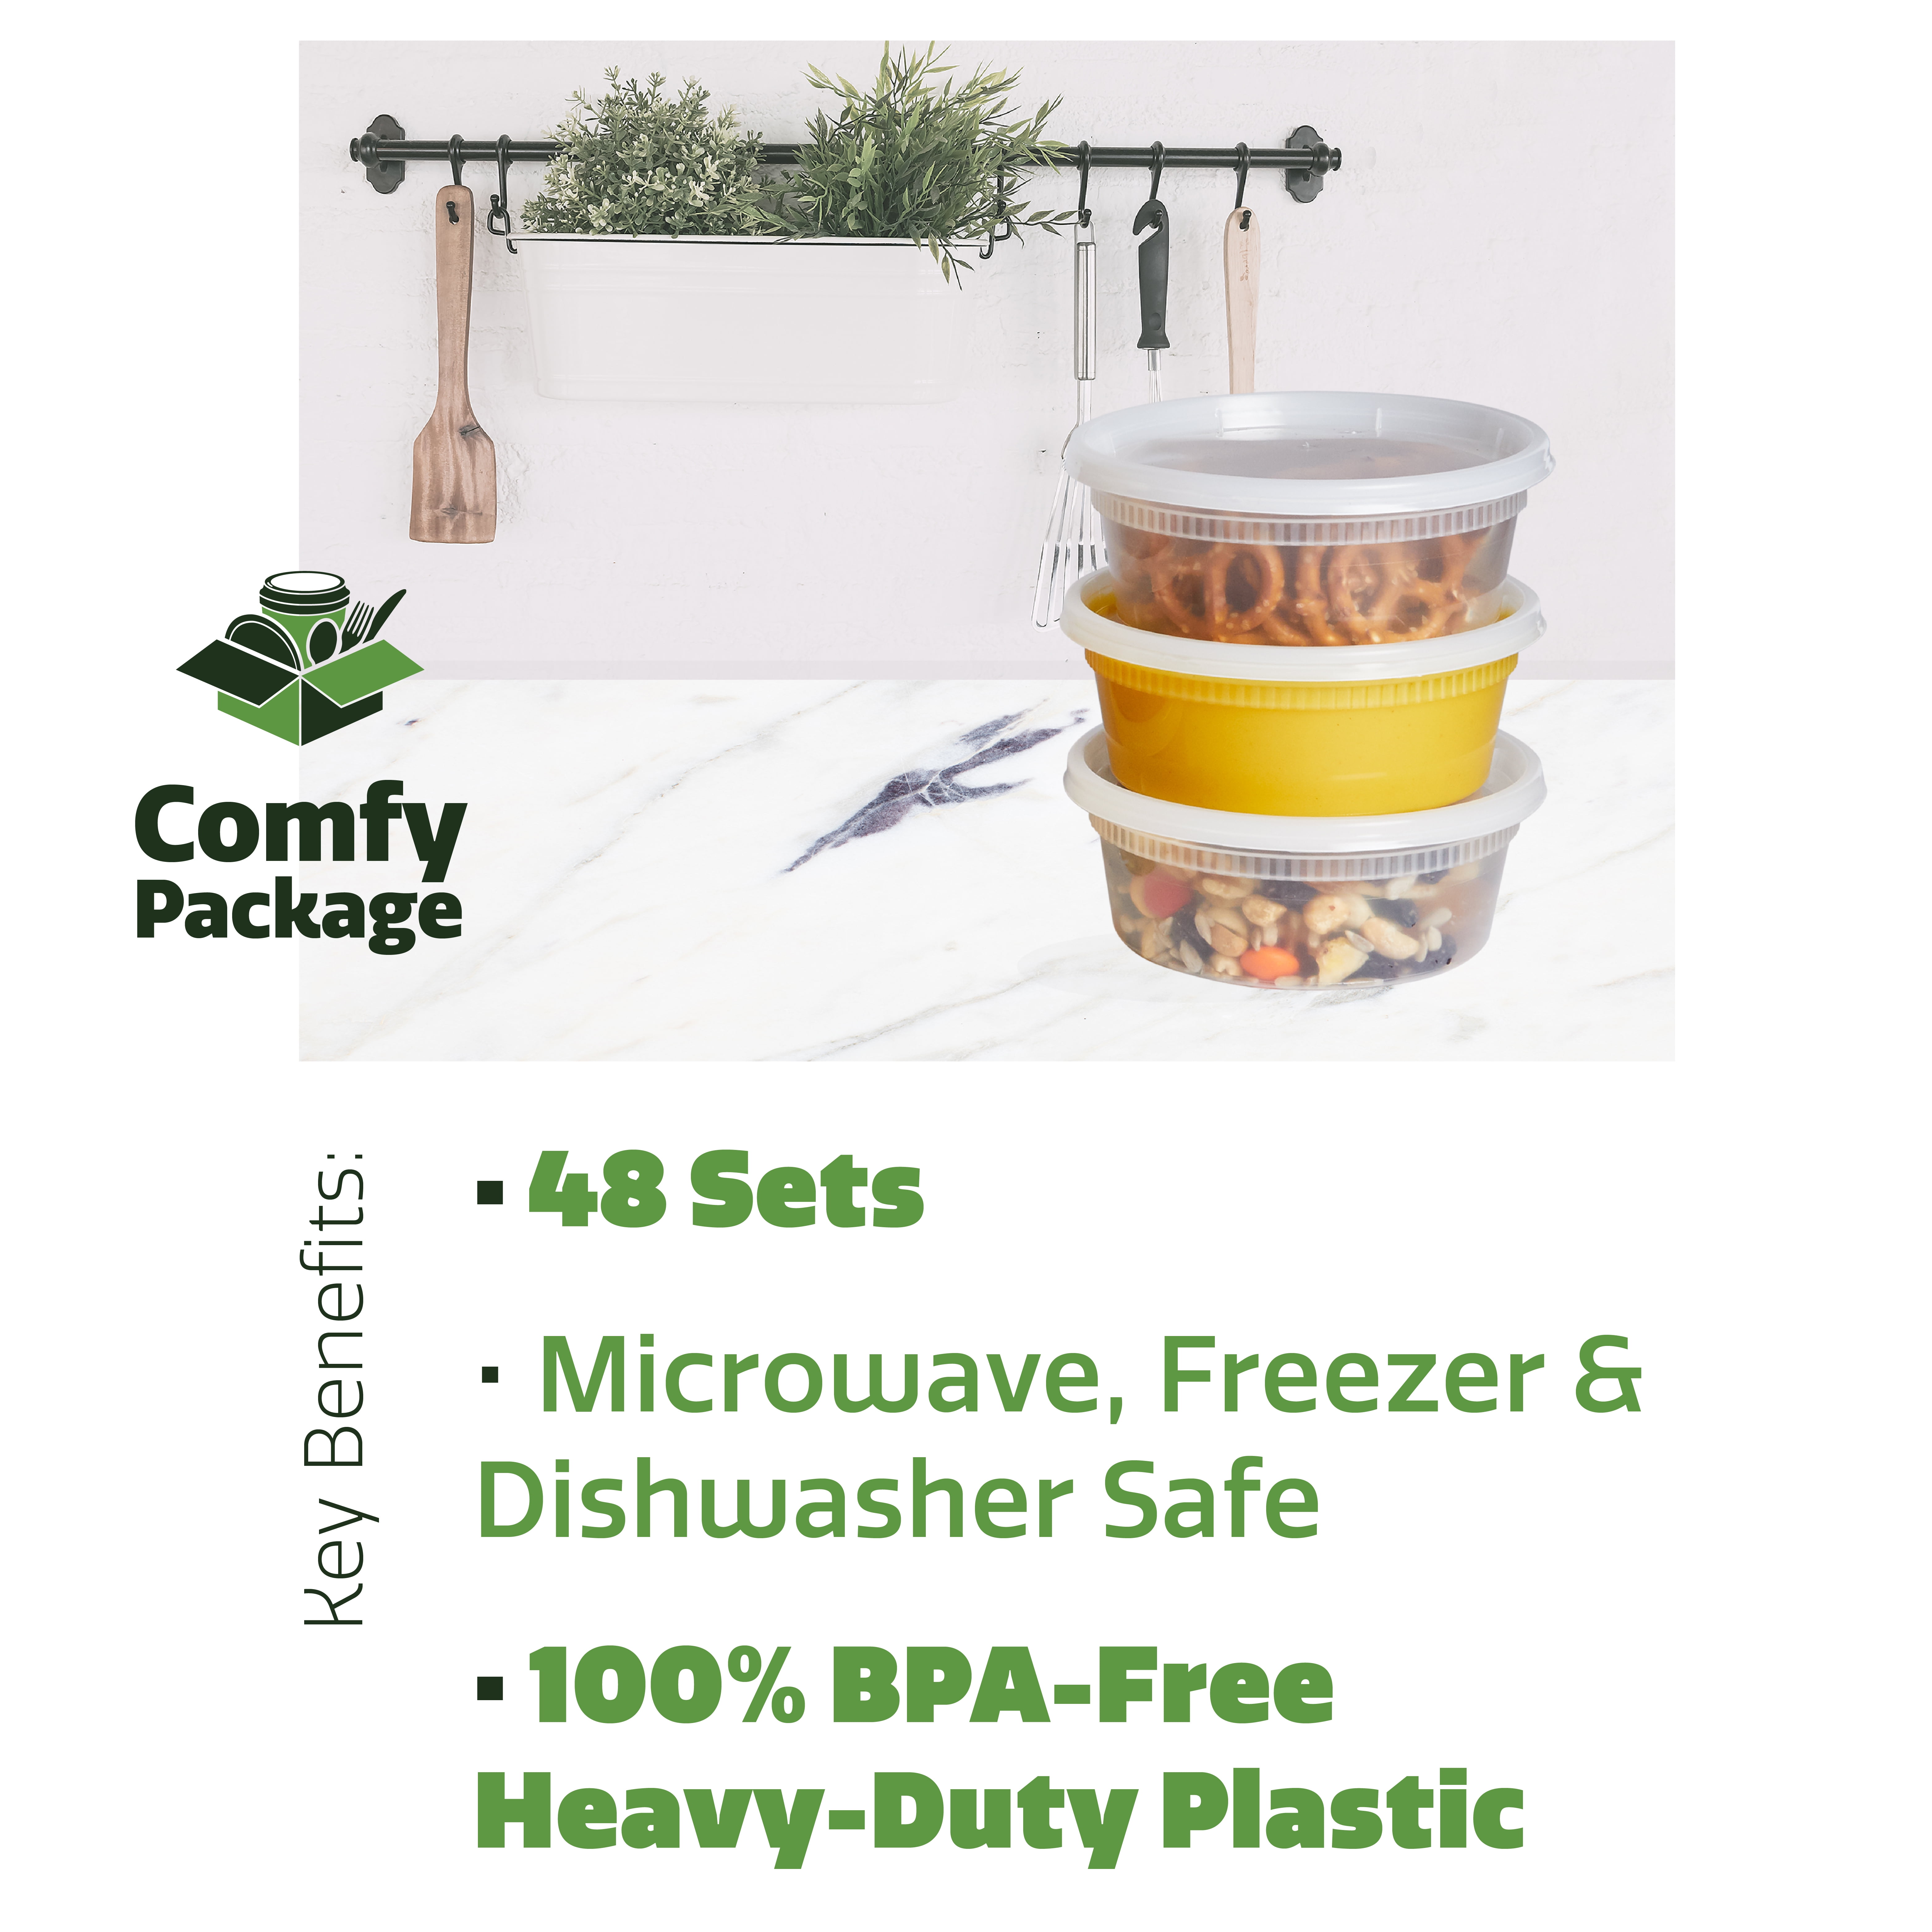 SafePro 32HD 32 oz. Clear Plastic HD Soup Combo Containers with Flat Lid 240-Piece Case